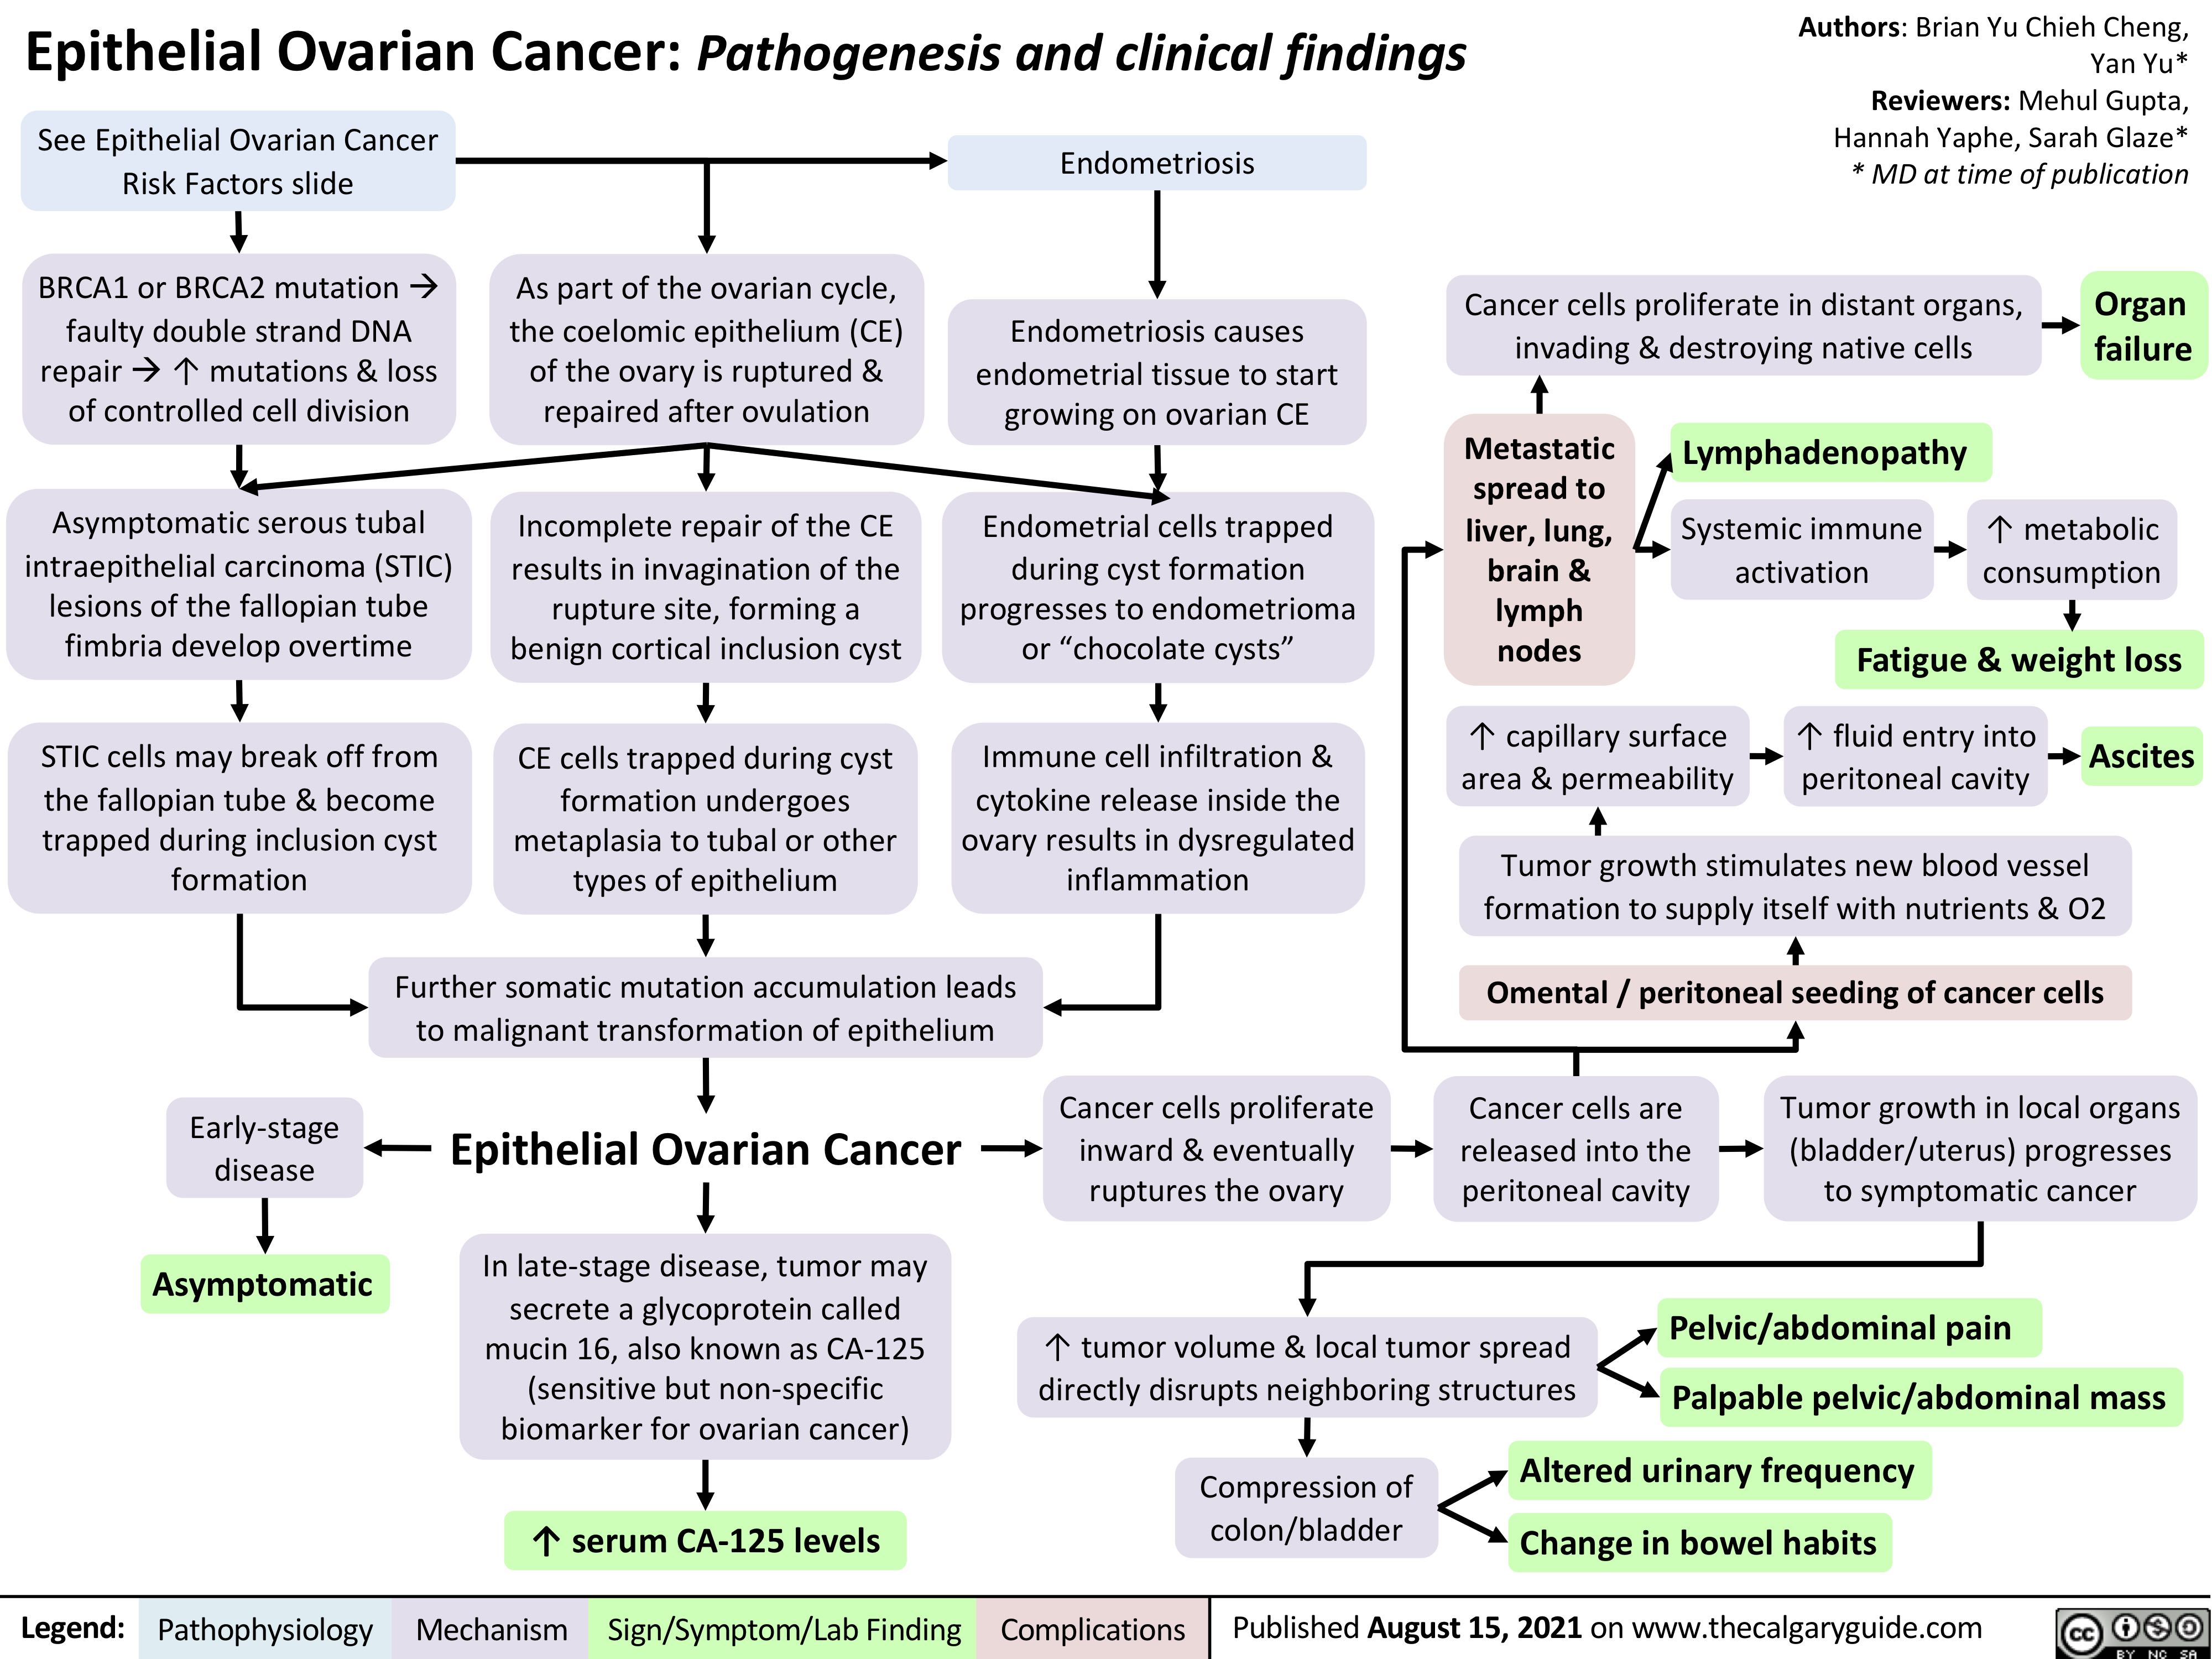 Epithelial Ovarian Cancer Pathogenesis And Clinical Findings Calgary Guide